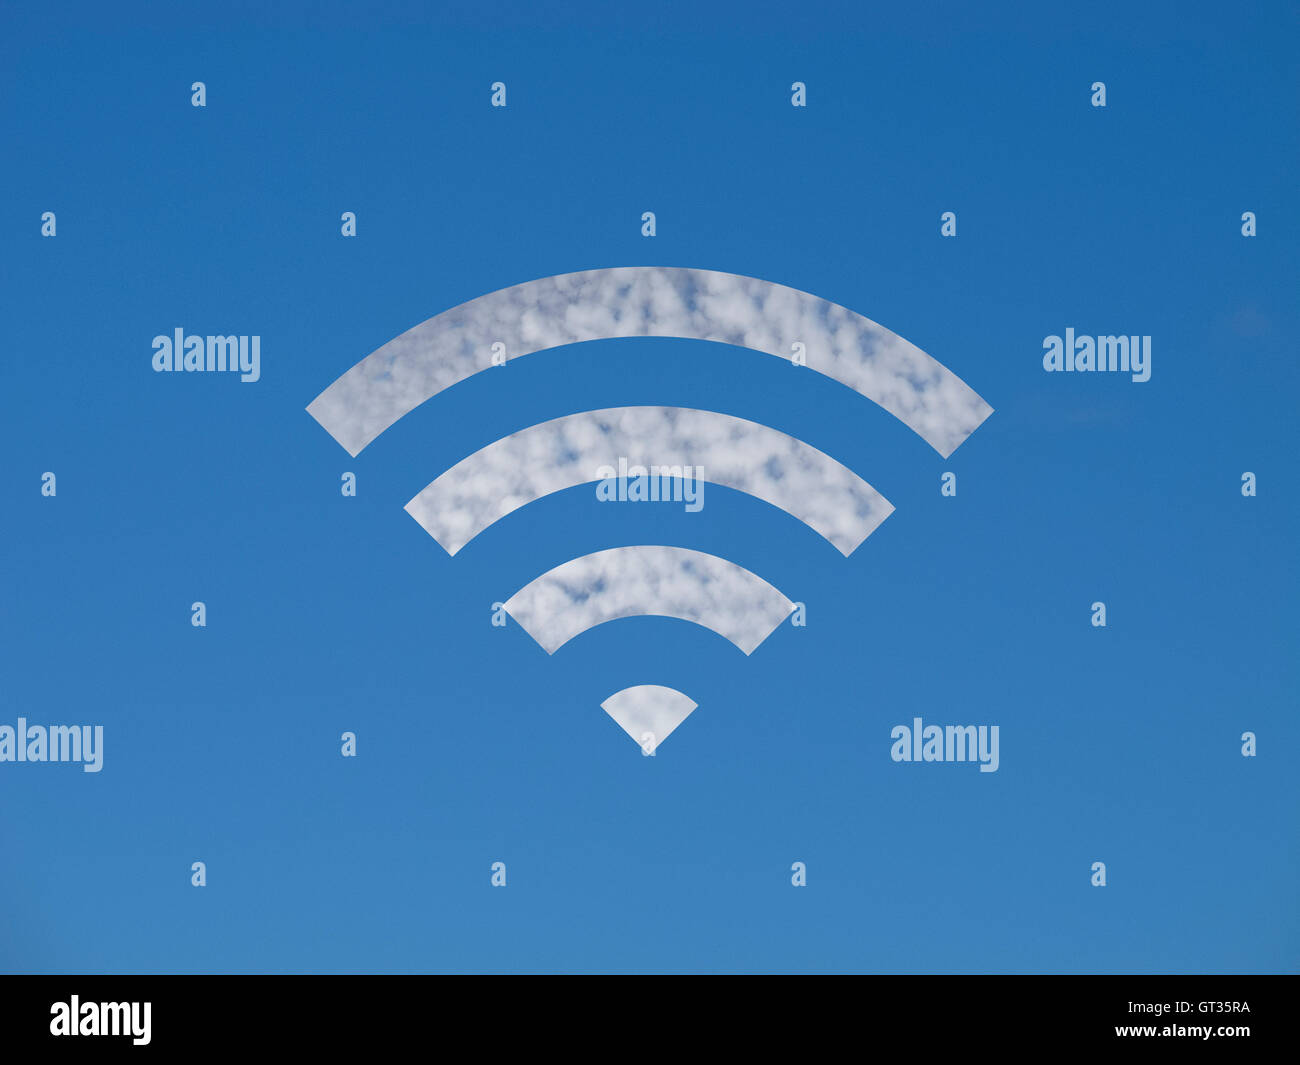 Wifi logo made out of a cloud Stock Photo